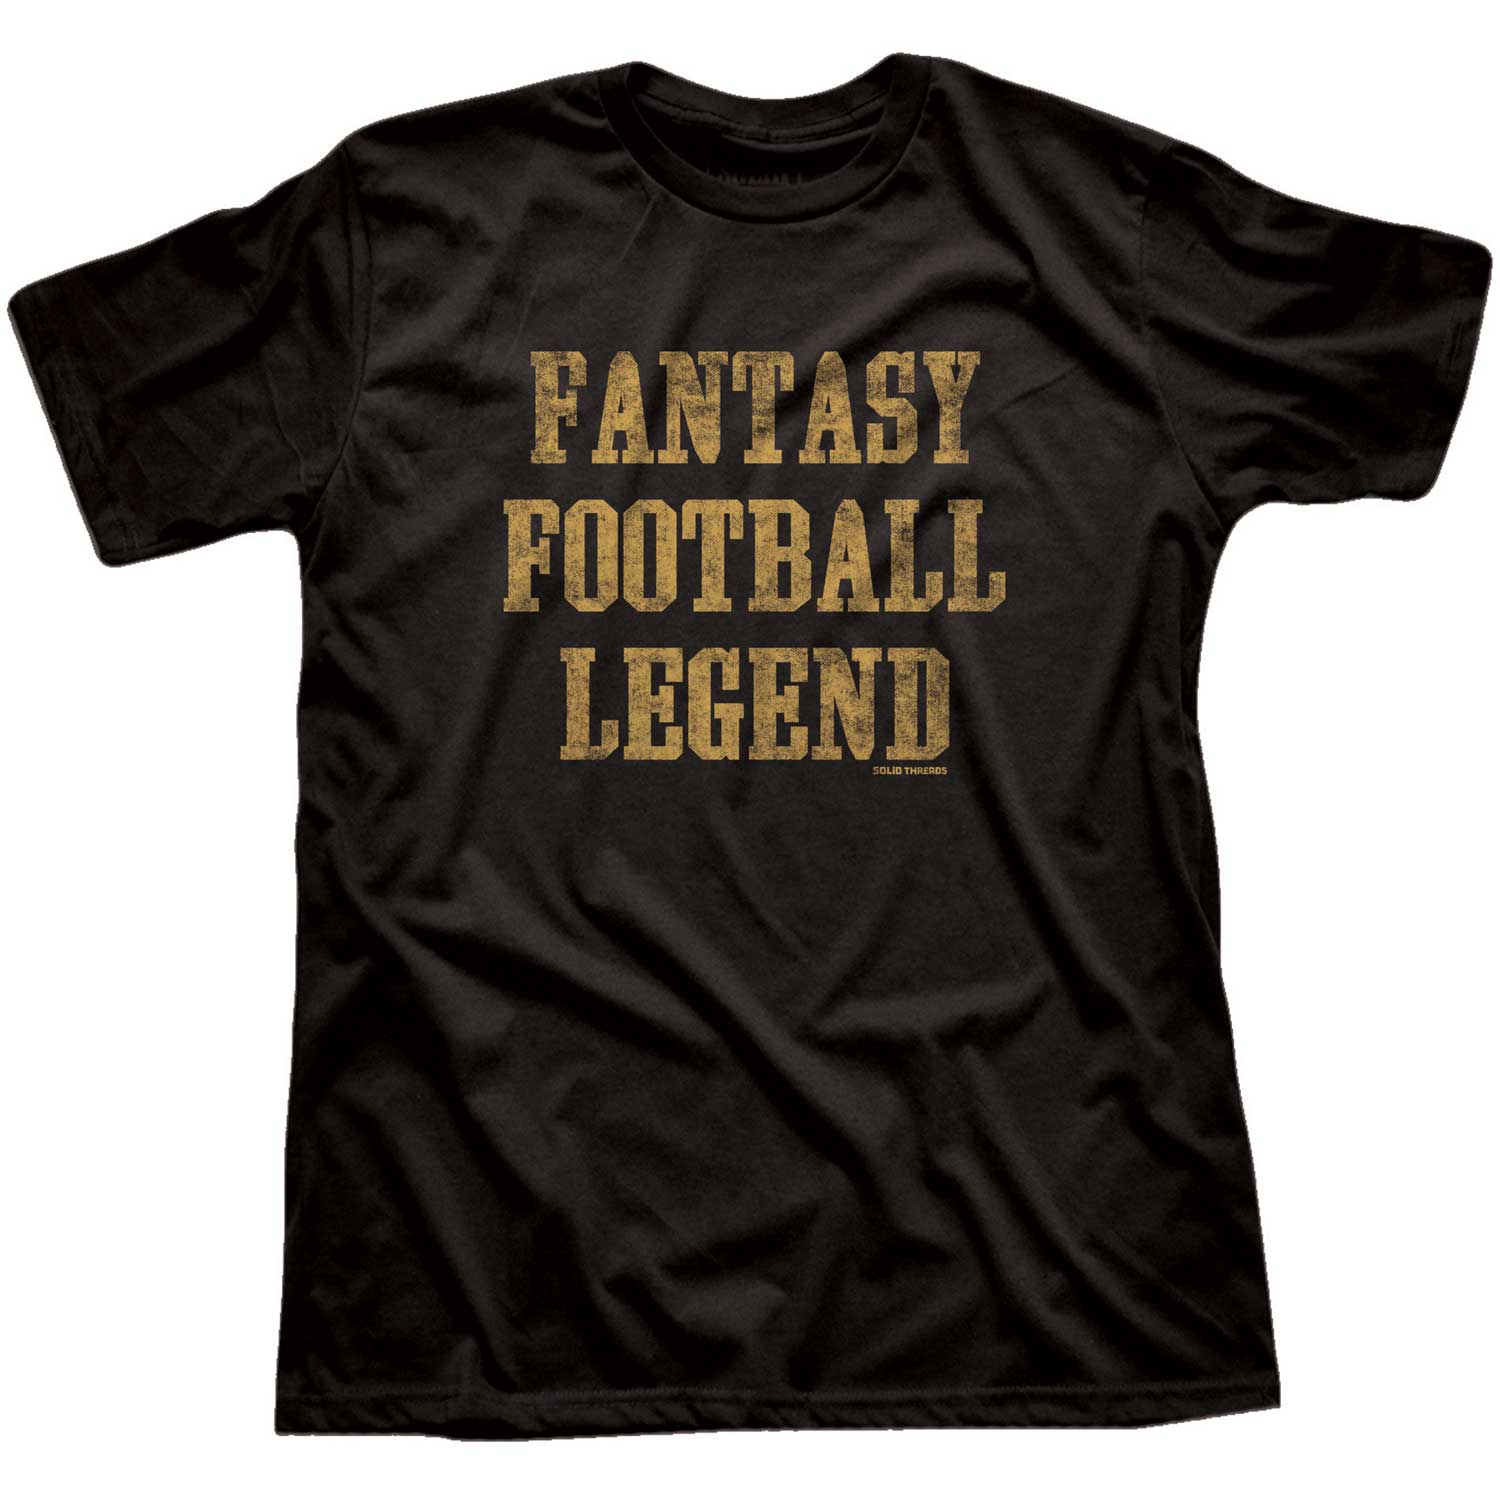 Men’s Fantasy Football Legend Vintage Graphic Tee | Funny Sports T-shirt | Solid Threads